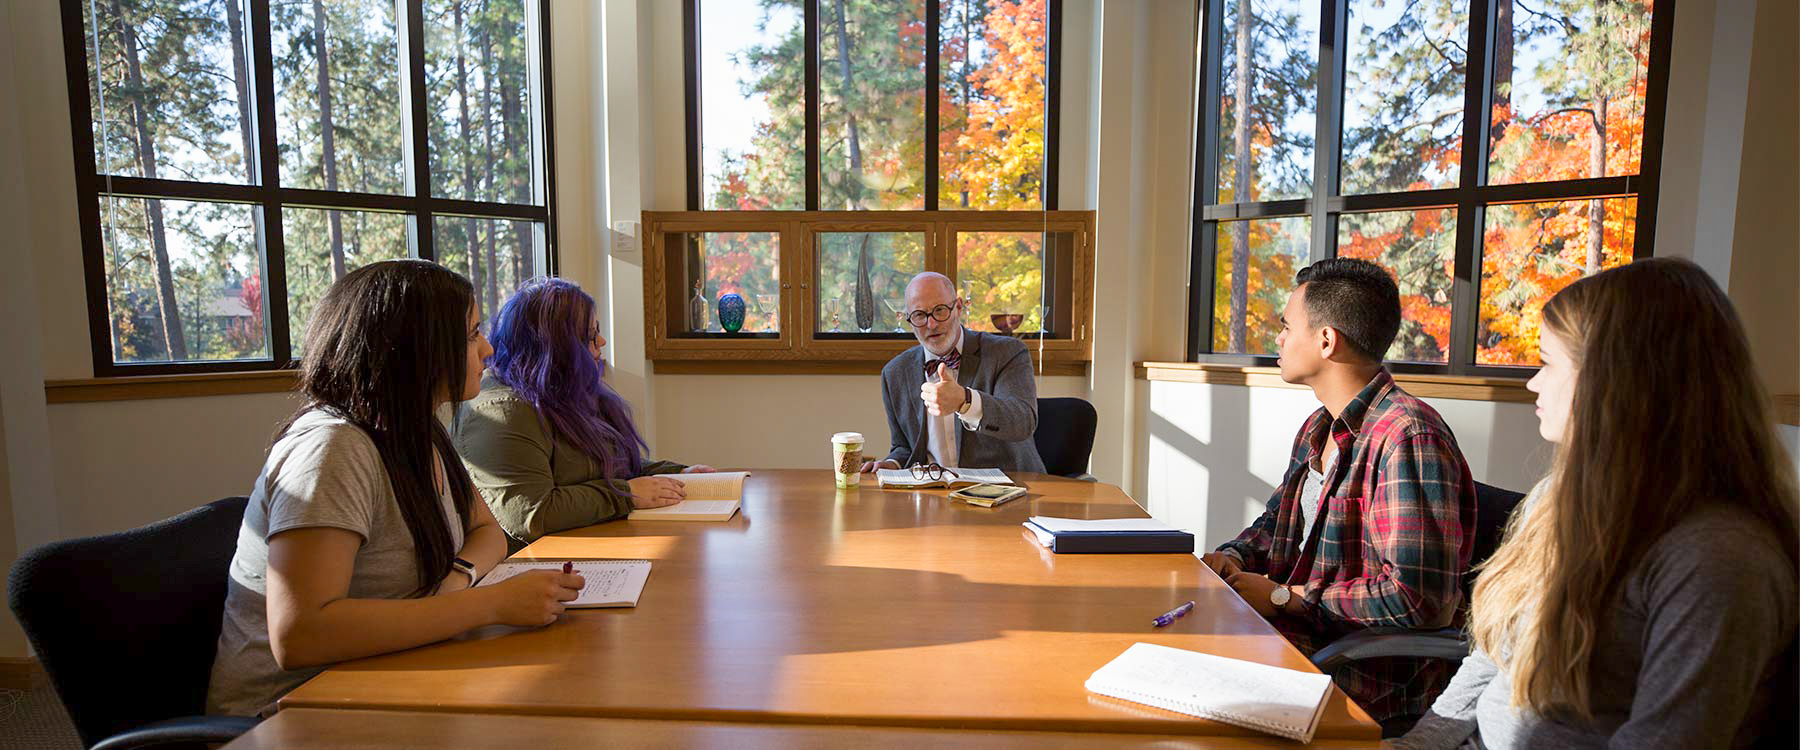 A professor sits at the end of a long table with students on either side listening intently.